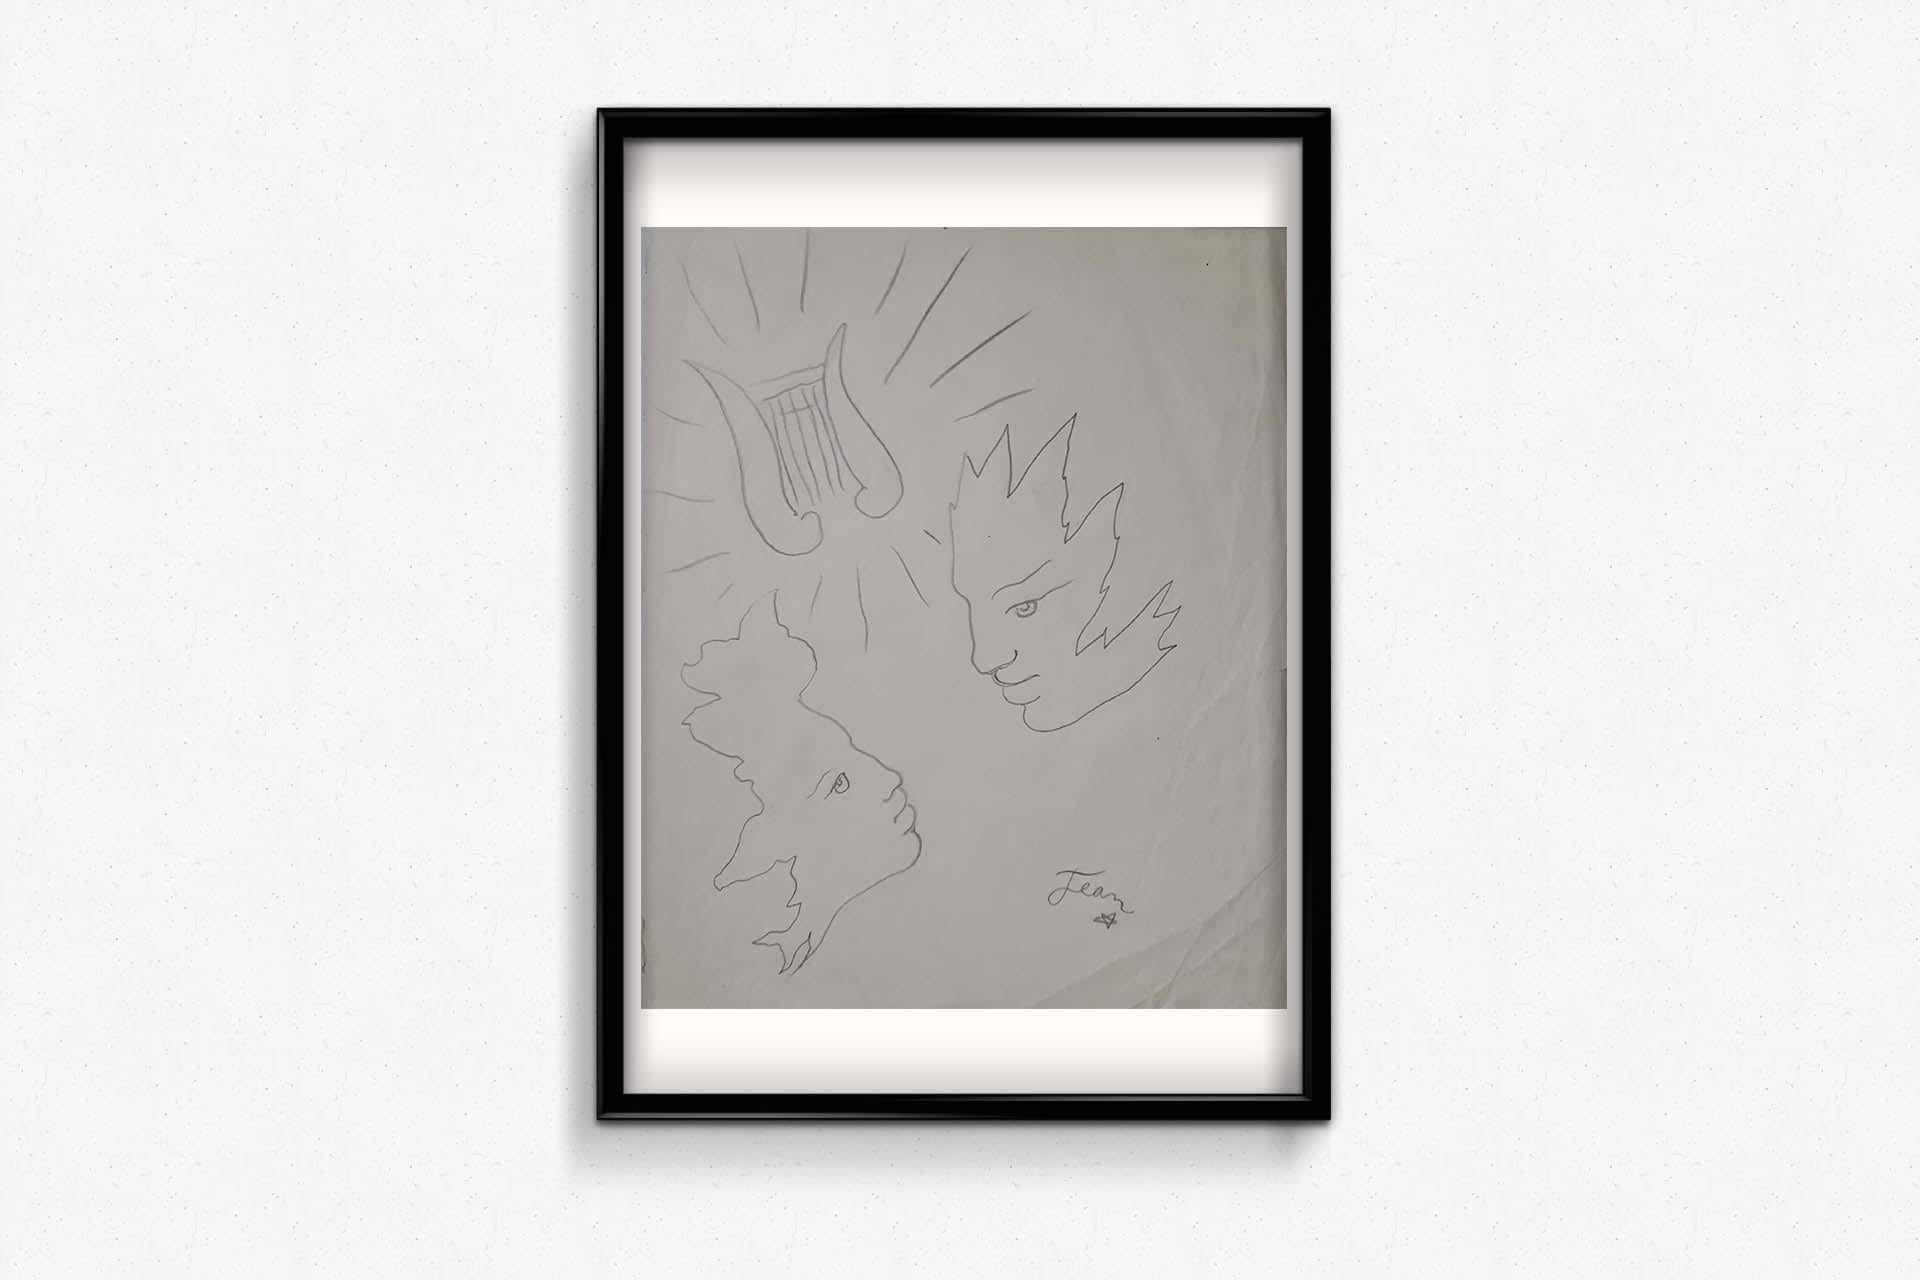 Jean Cocteau's drawing 